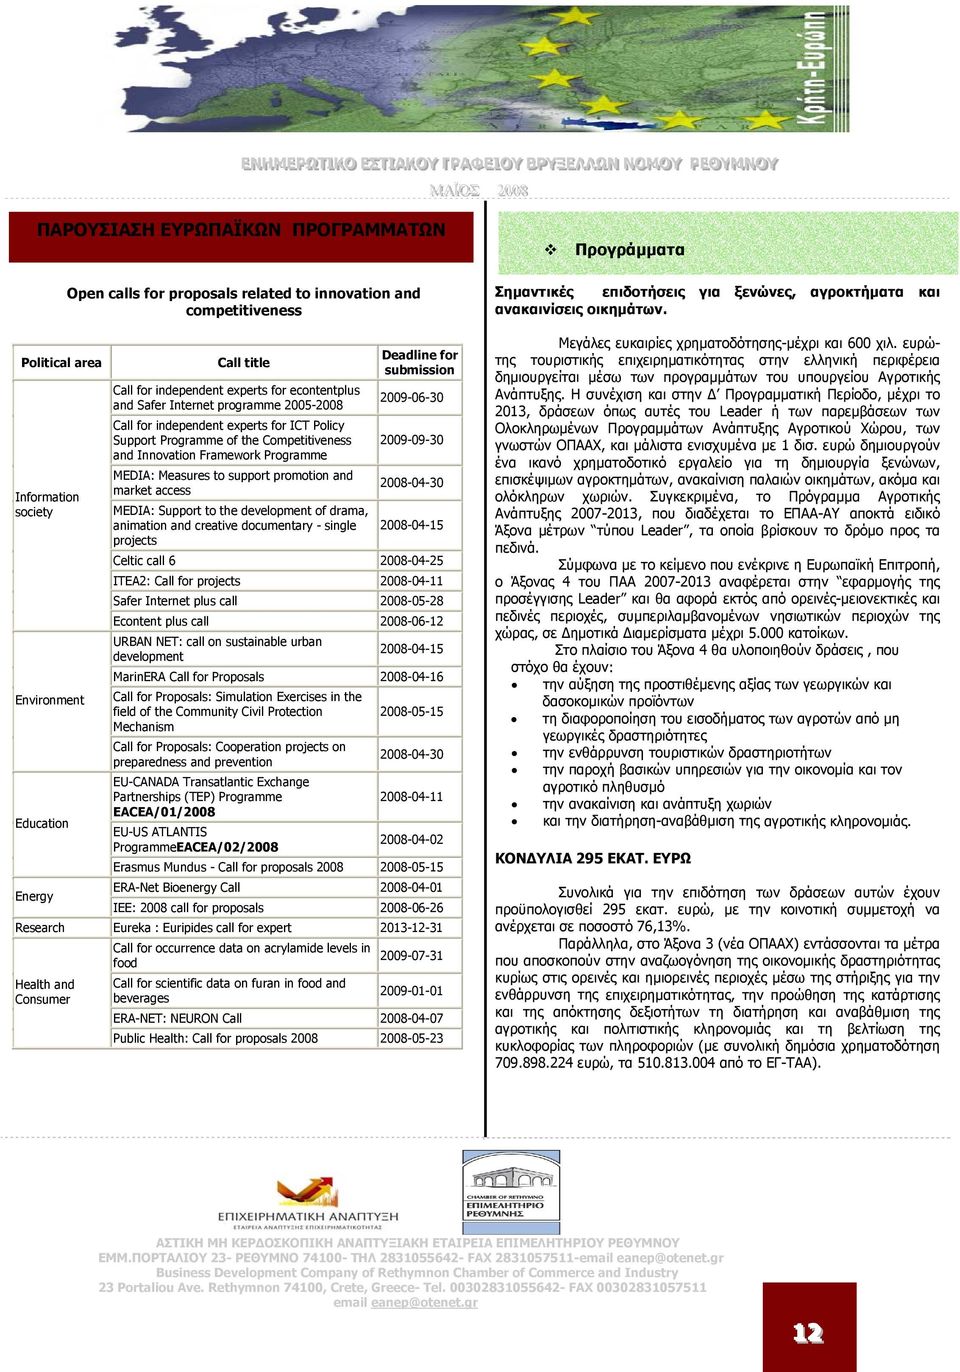 MEDIA: Measures to support promotion and market access MEDIA: Support to the development of drama, animation and creative documentary - single projects Deadline for submission 2009-06-30 2009-09-30